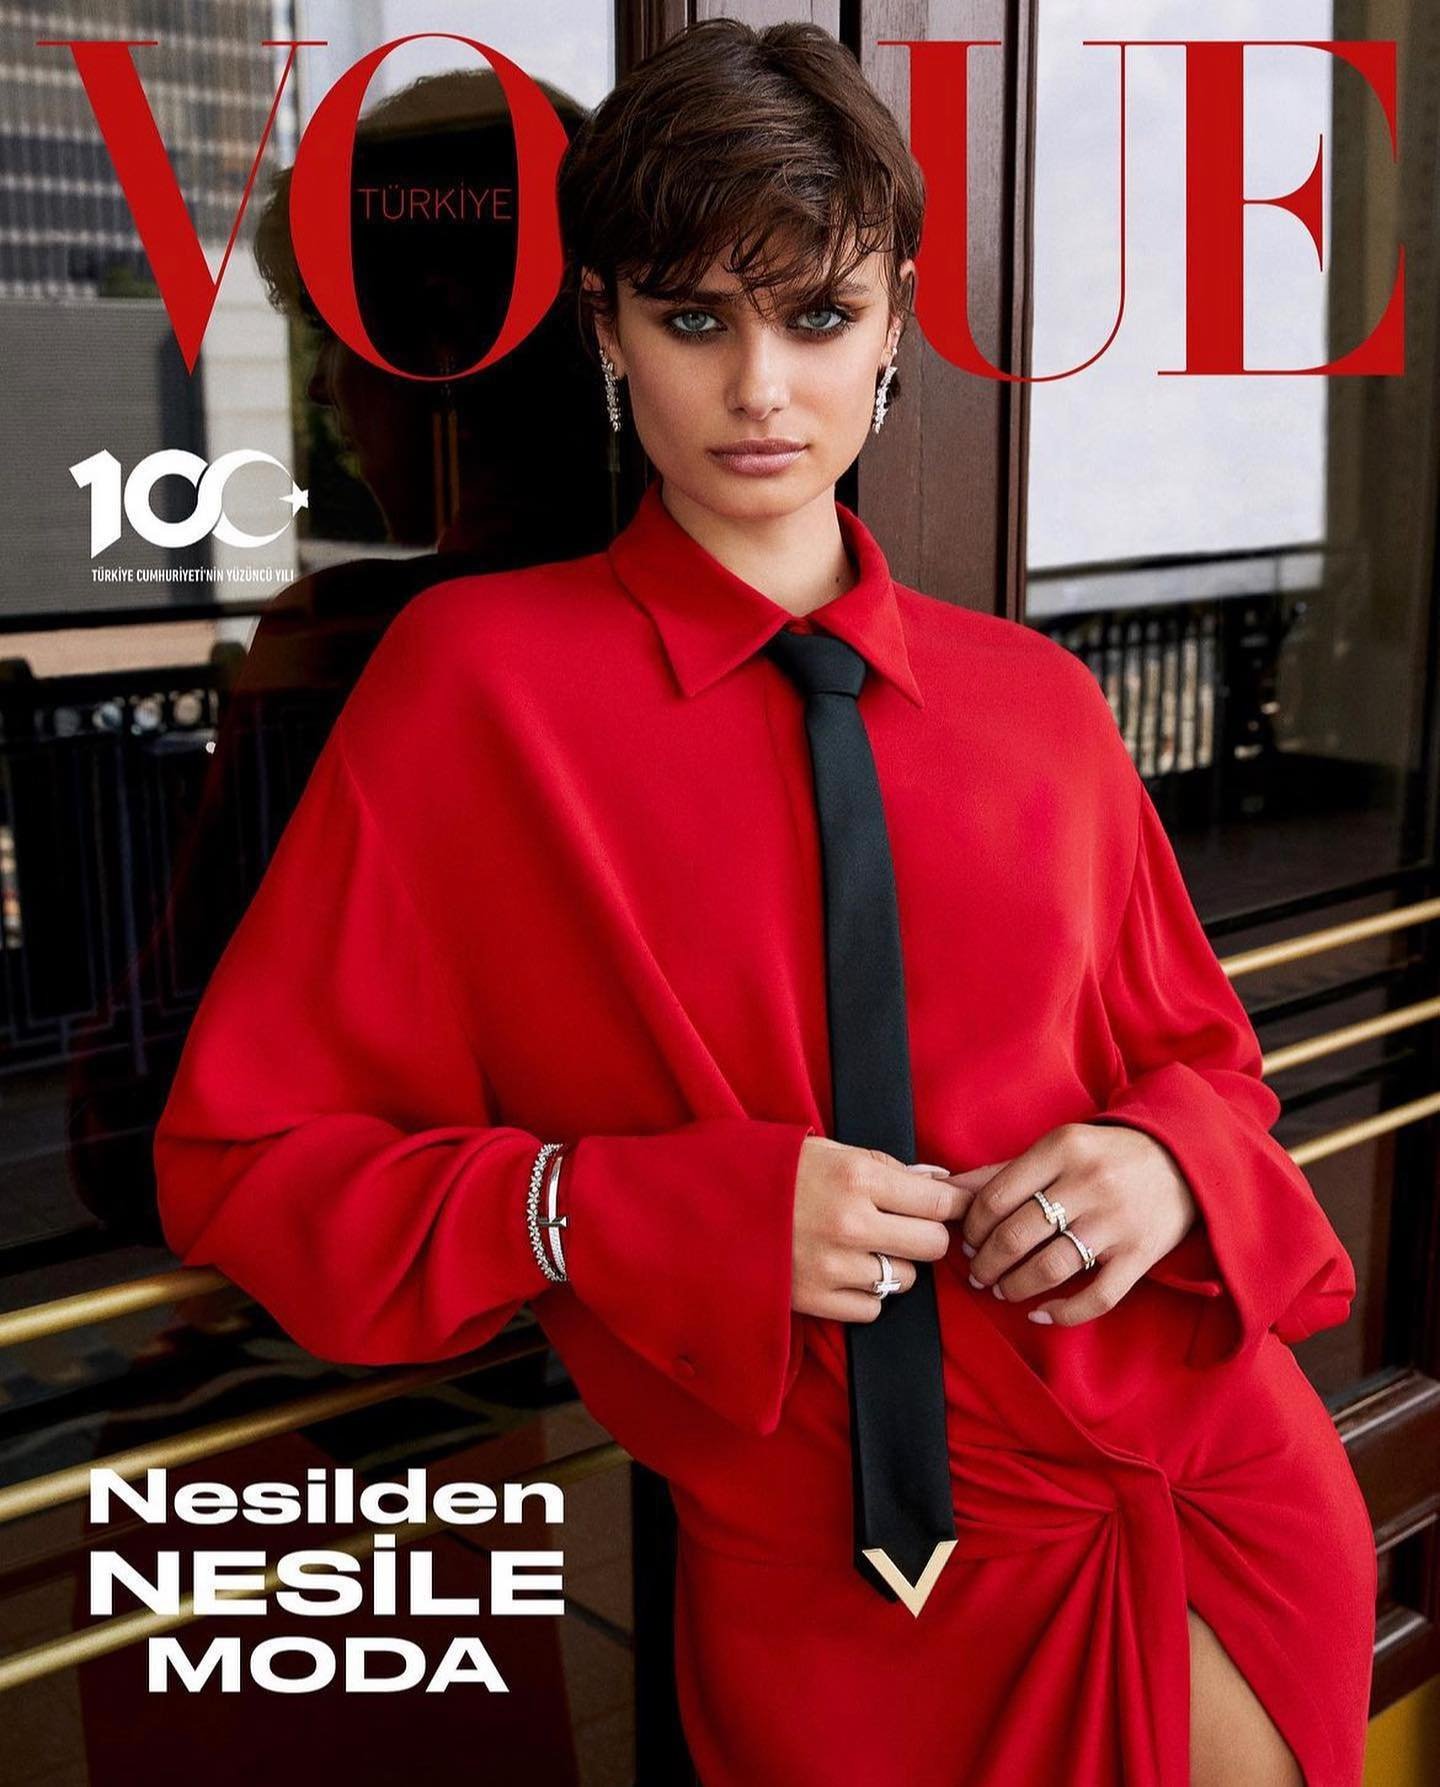 Taylor-Hill-by-Max-Papendieck-Vogue-Turkey-October-2023-1.jpg